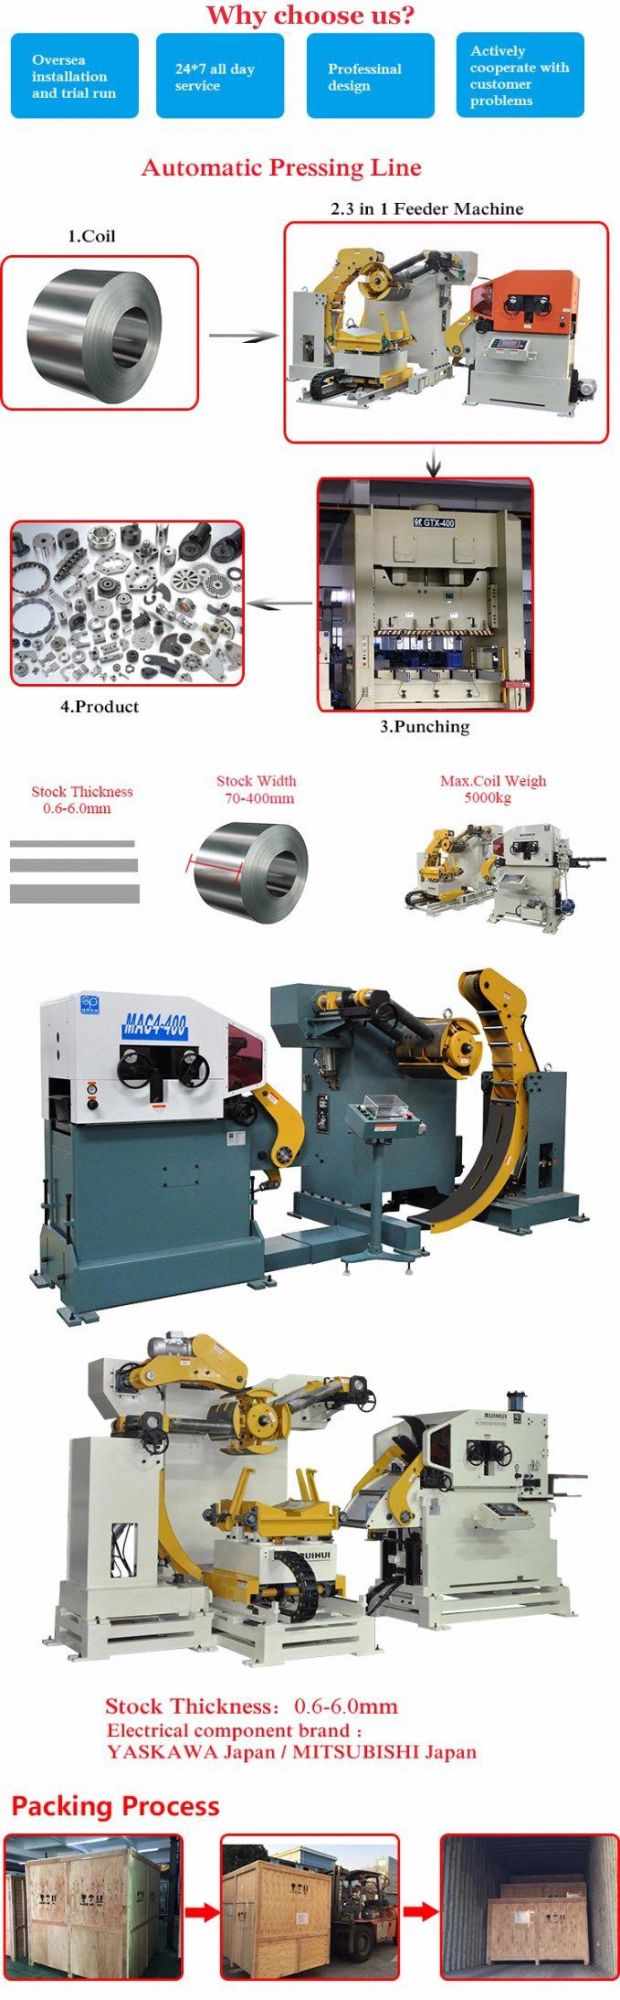 Compact Press Feeding Systems /Coil Decoil Straightener Feeder System / (MAC1-800H)